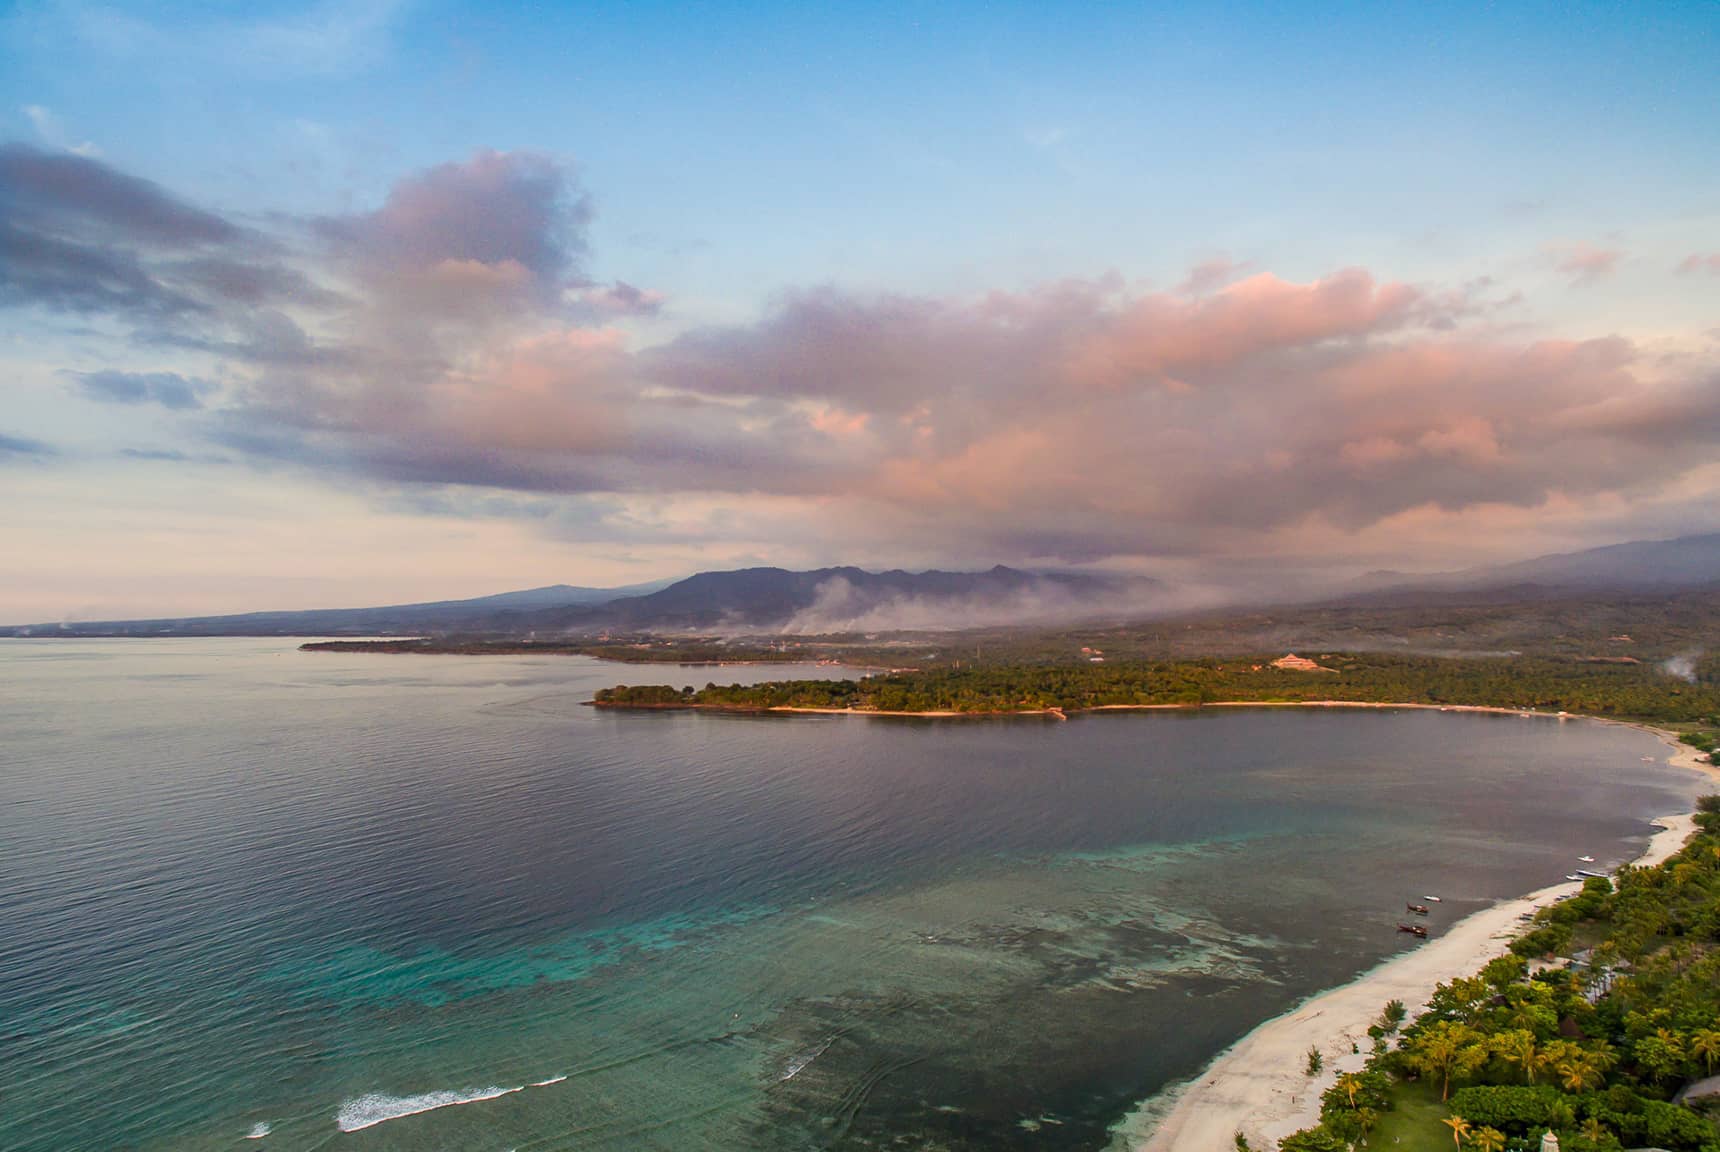 View towards the Gili Islands